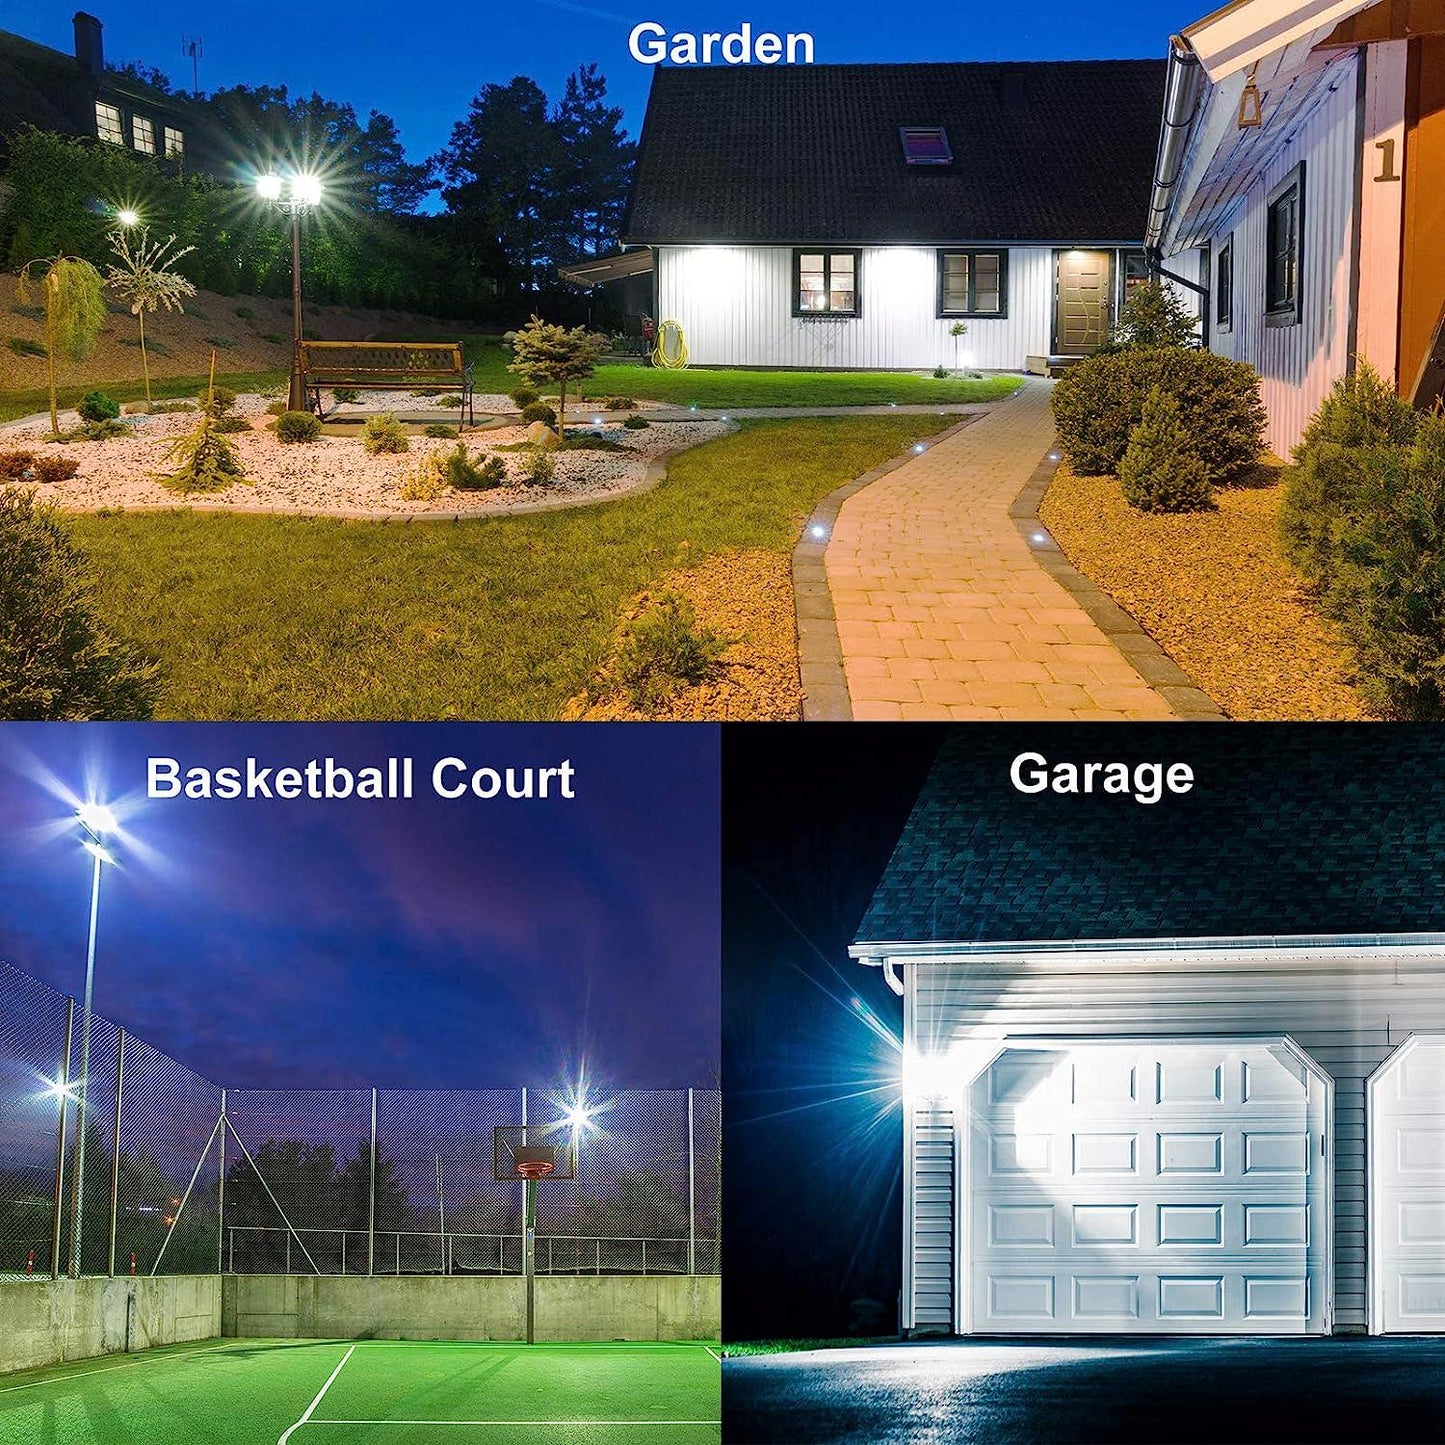 -LITE LED Flood Lights Outdoor, 100W 10000LM Outside LED Work Light with Plug, 6000K Daylight White, IP66 Waterproof Portable Spot Security Lights for Garage, Playground(2 Pack)